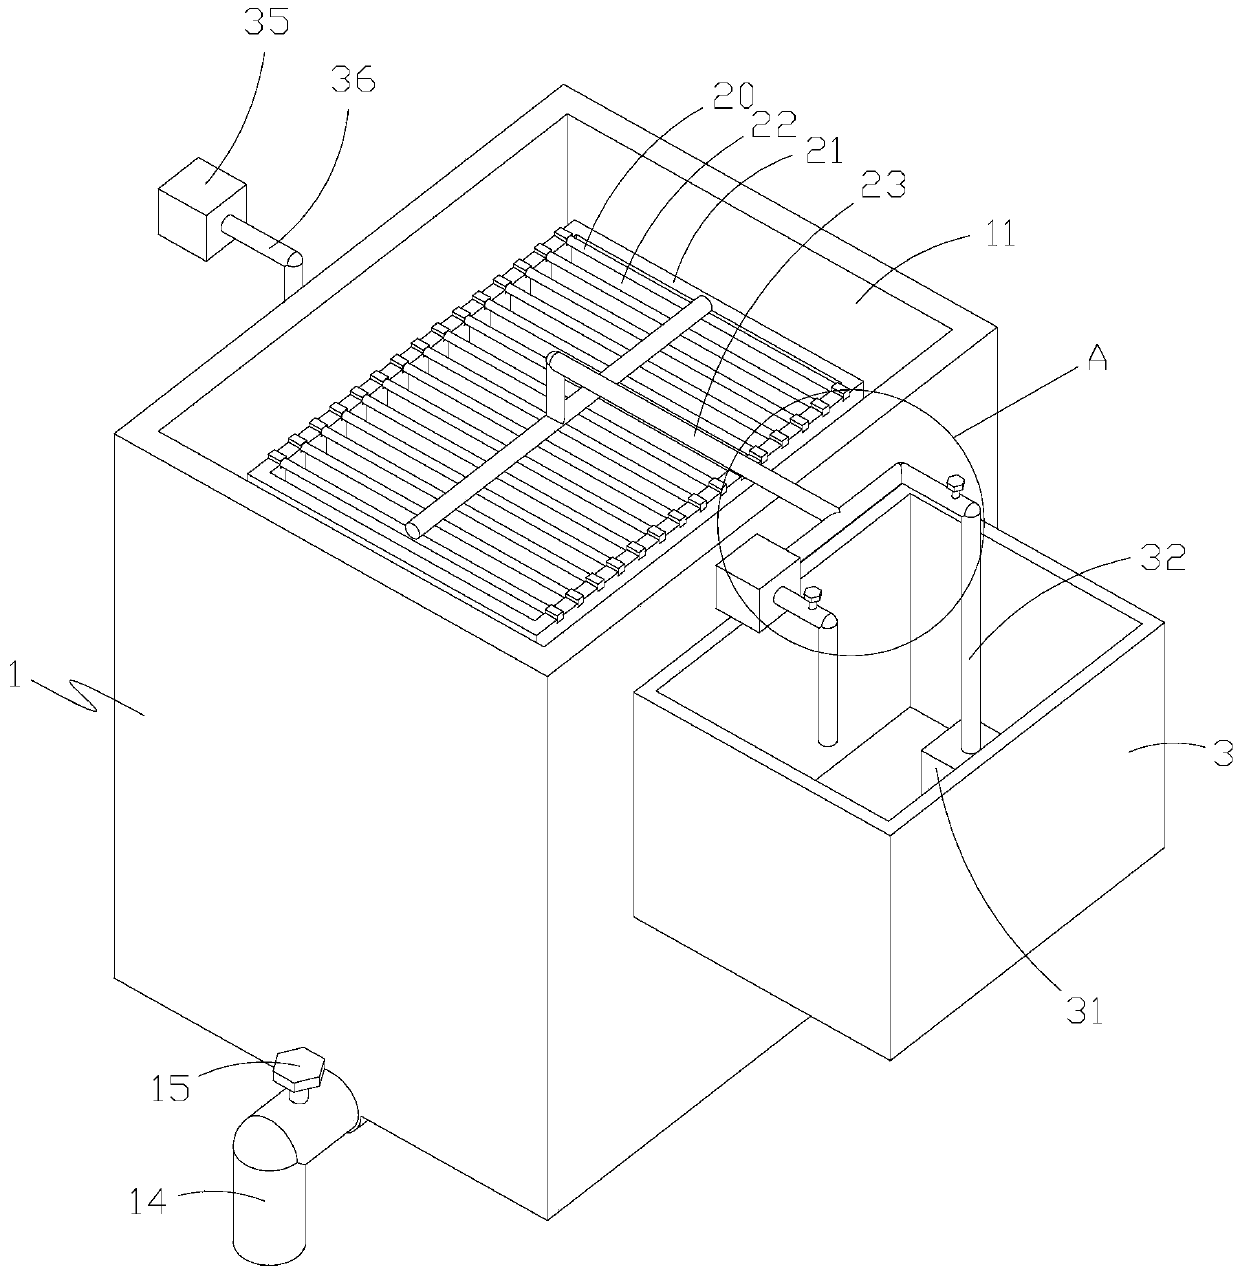 Water purification device using membrane filtration process